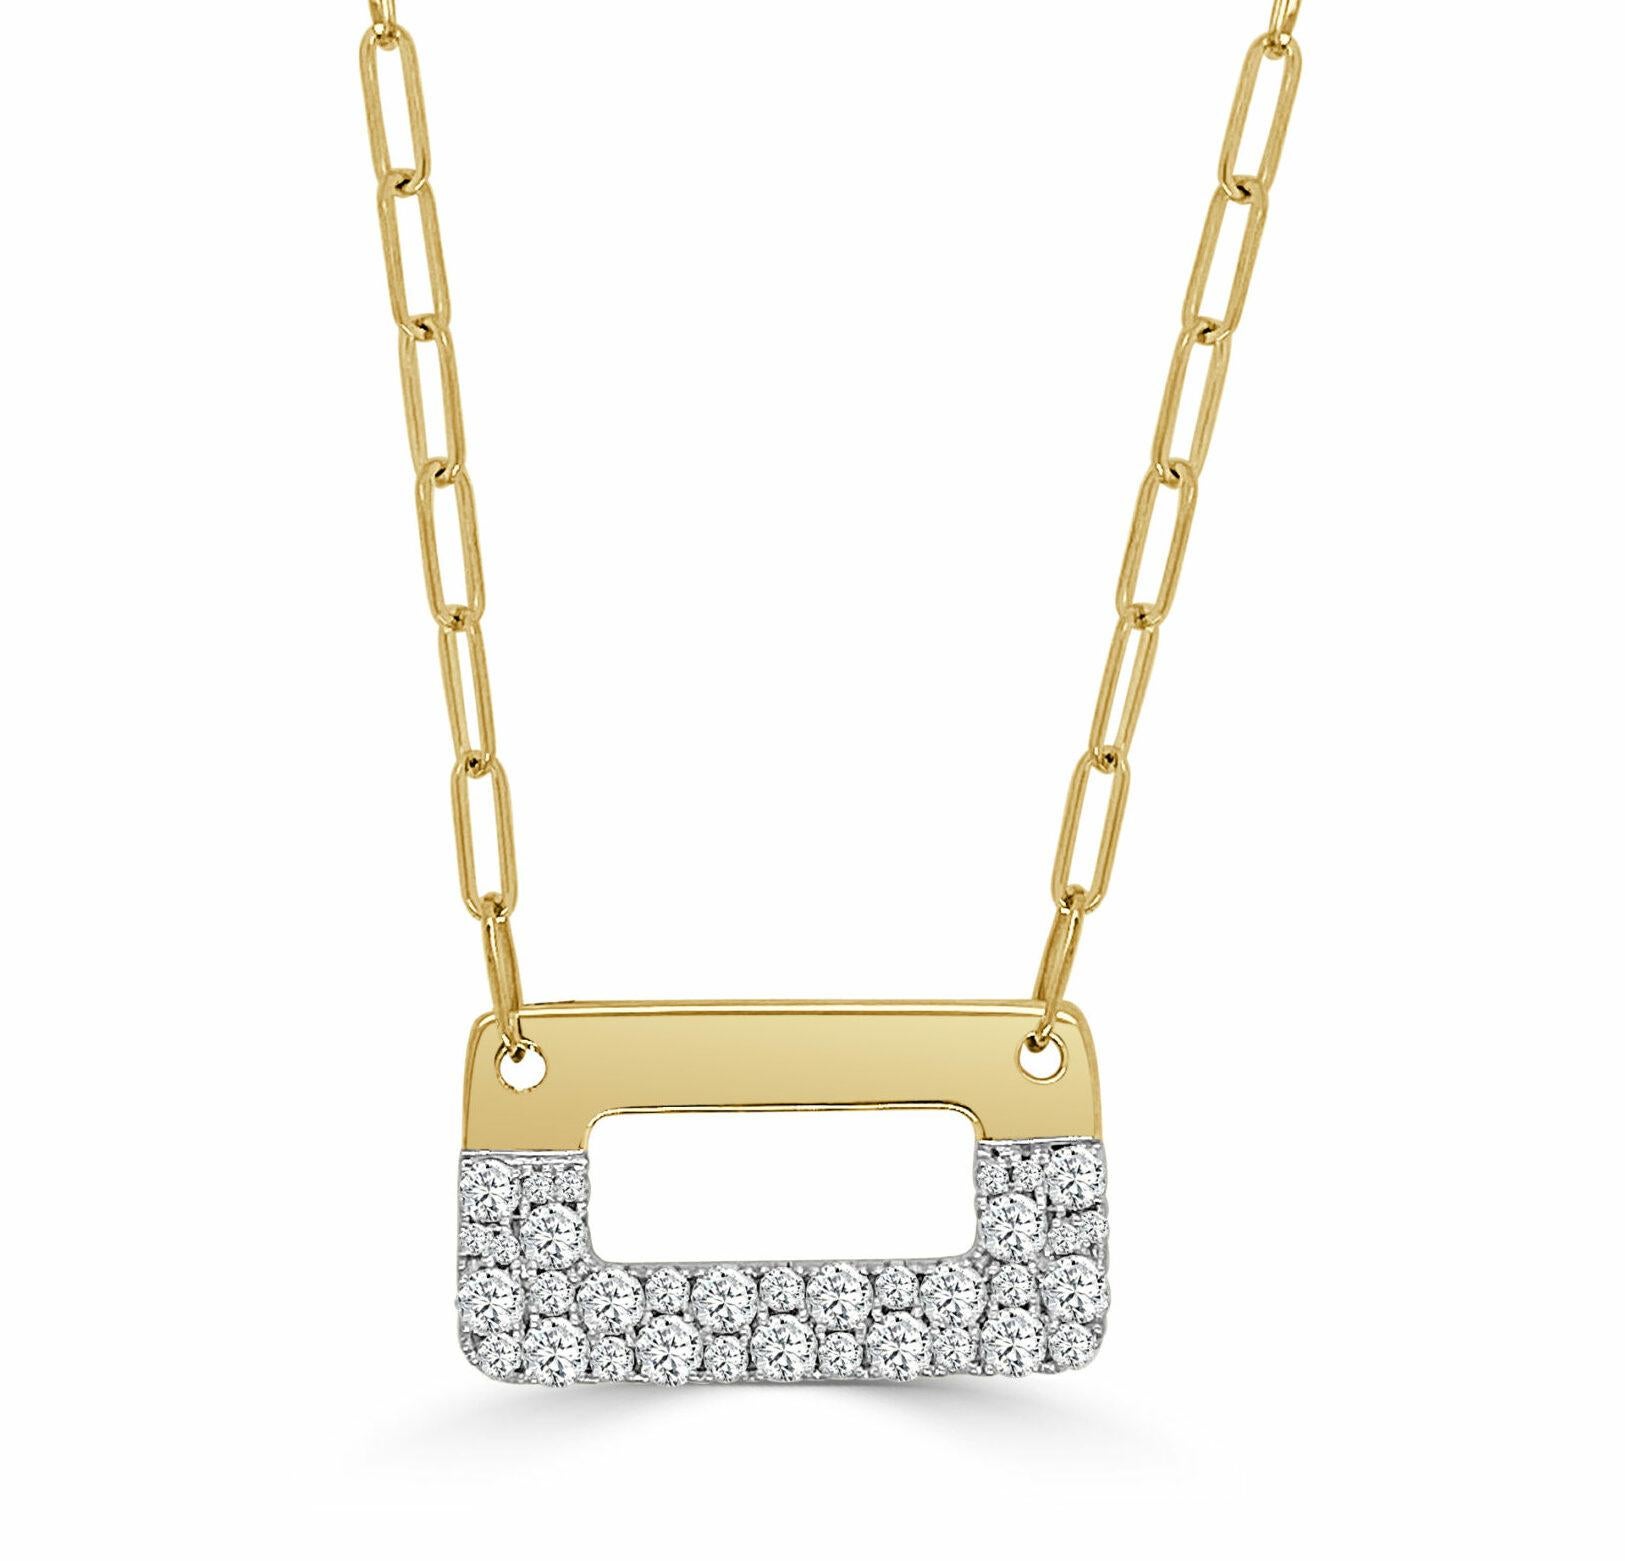 Medium Rectangular Open Nebula Half Diamond Pendant With Attached Paperclip Chain, 0.94 Ct, (approximately 14 mm x 24 mm)

Available in other metal/ gemstone options: This Diamond pendant can be made in white, pink or yellow gold. 
Matching